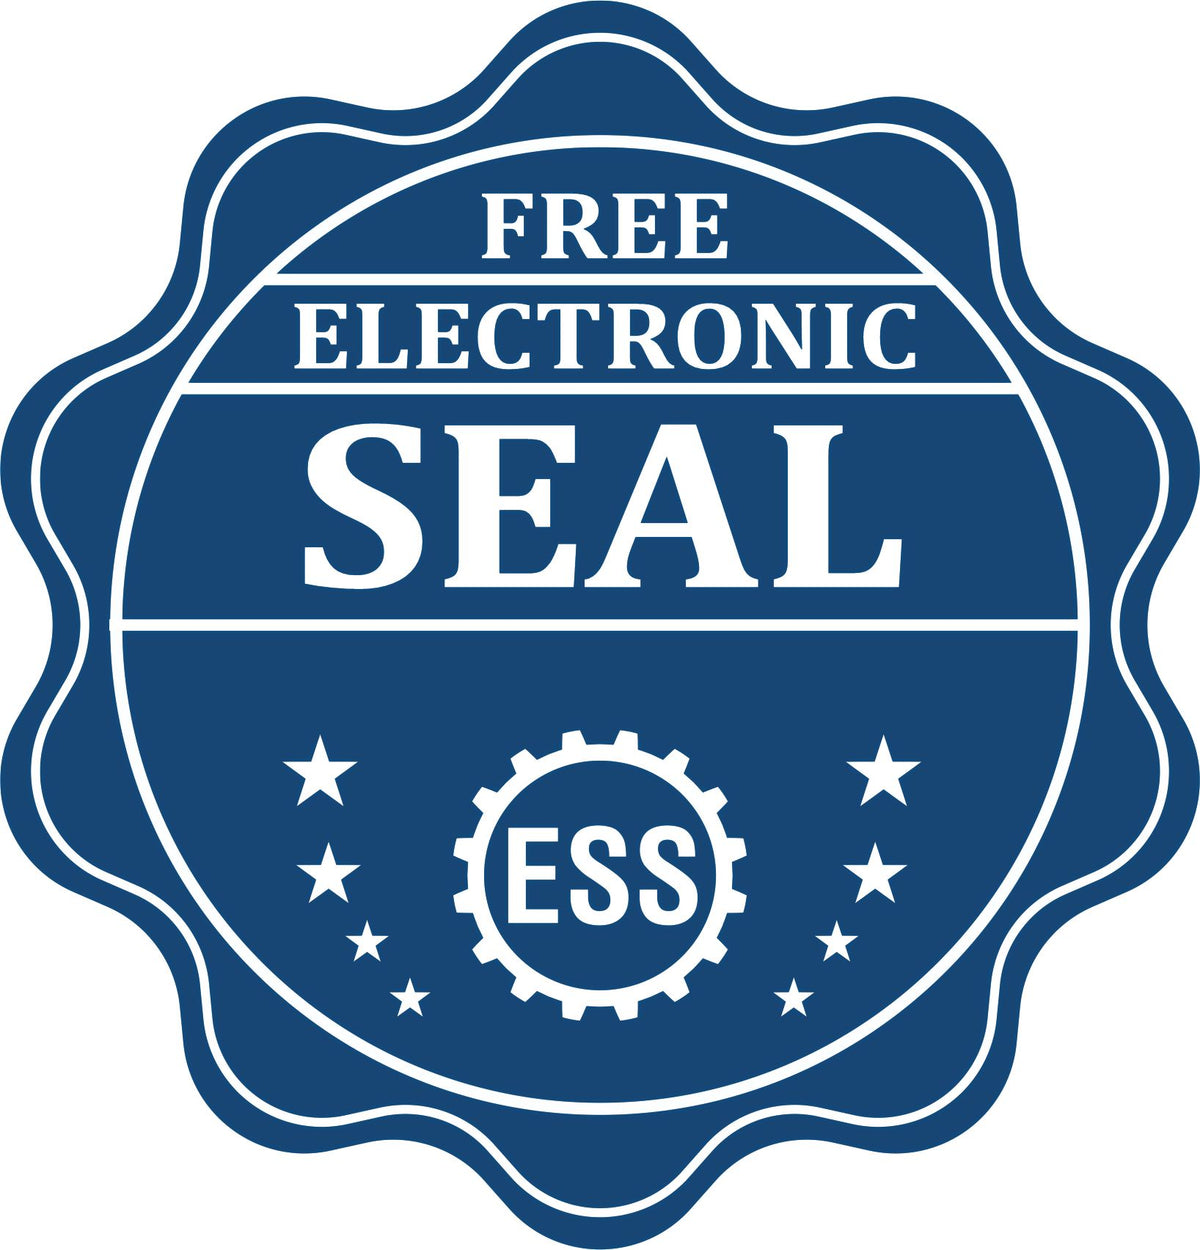 A badge showing a free electronic seal for the Heavy Duty Cast Iron Guam Engineer Seal Embosser with stars and the ESS gear on the emblem.